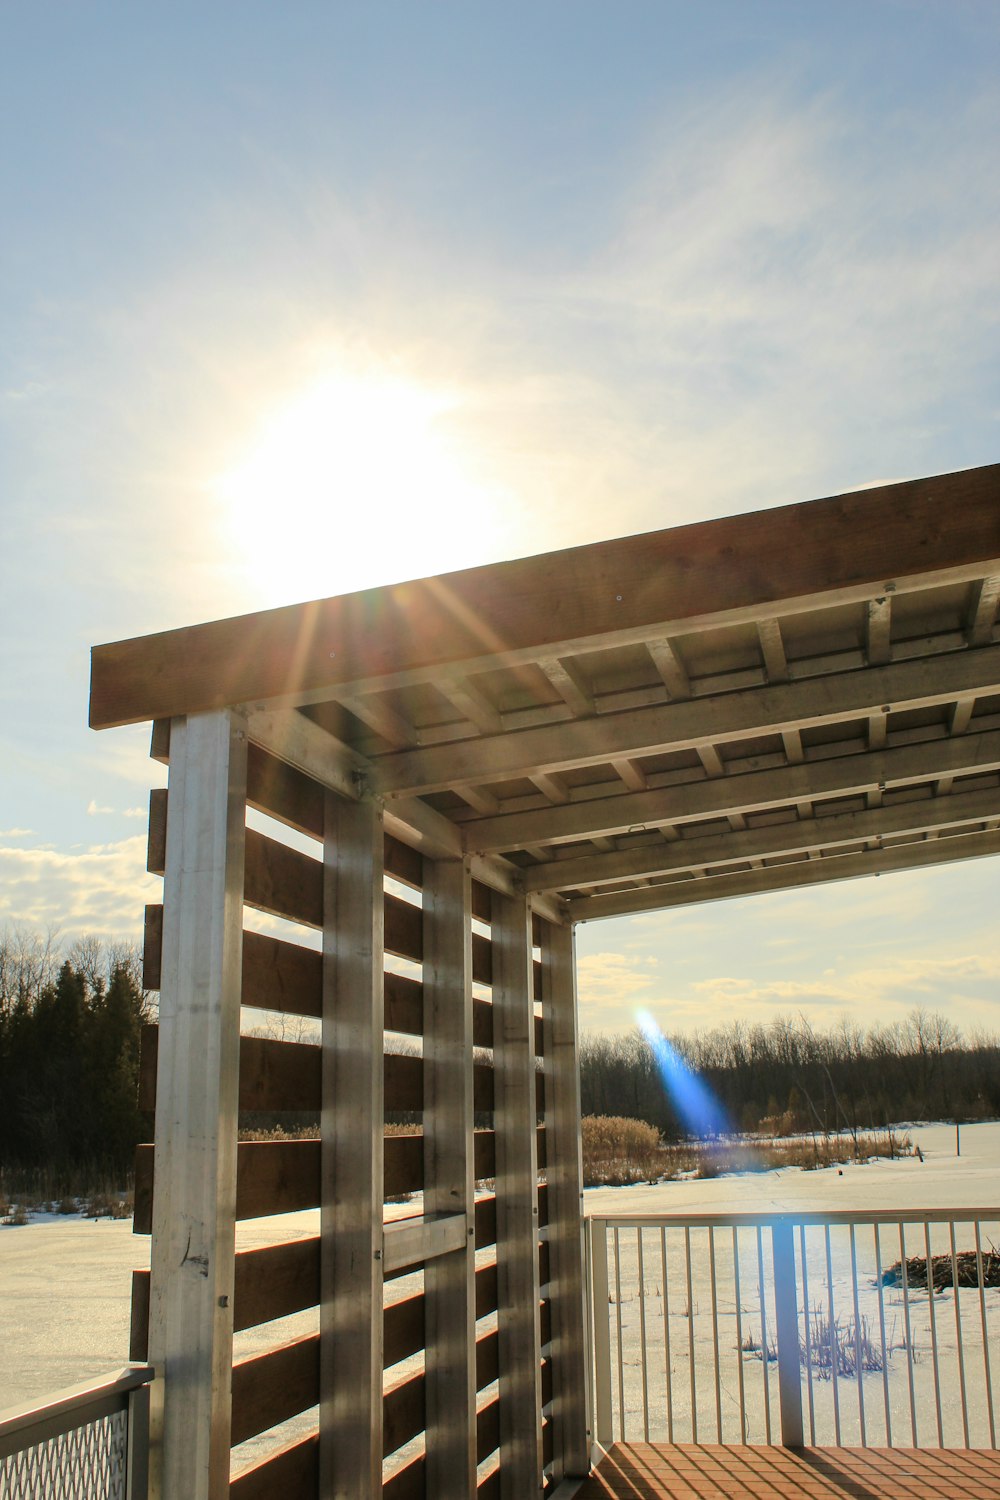 the sun is shining over a wooden structure